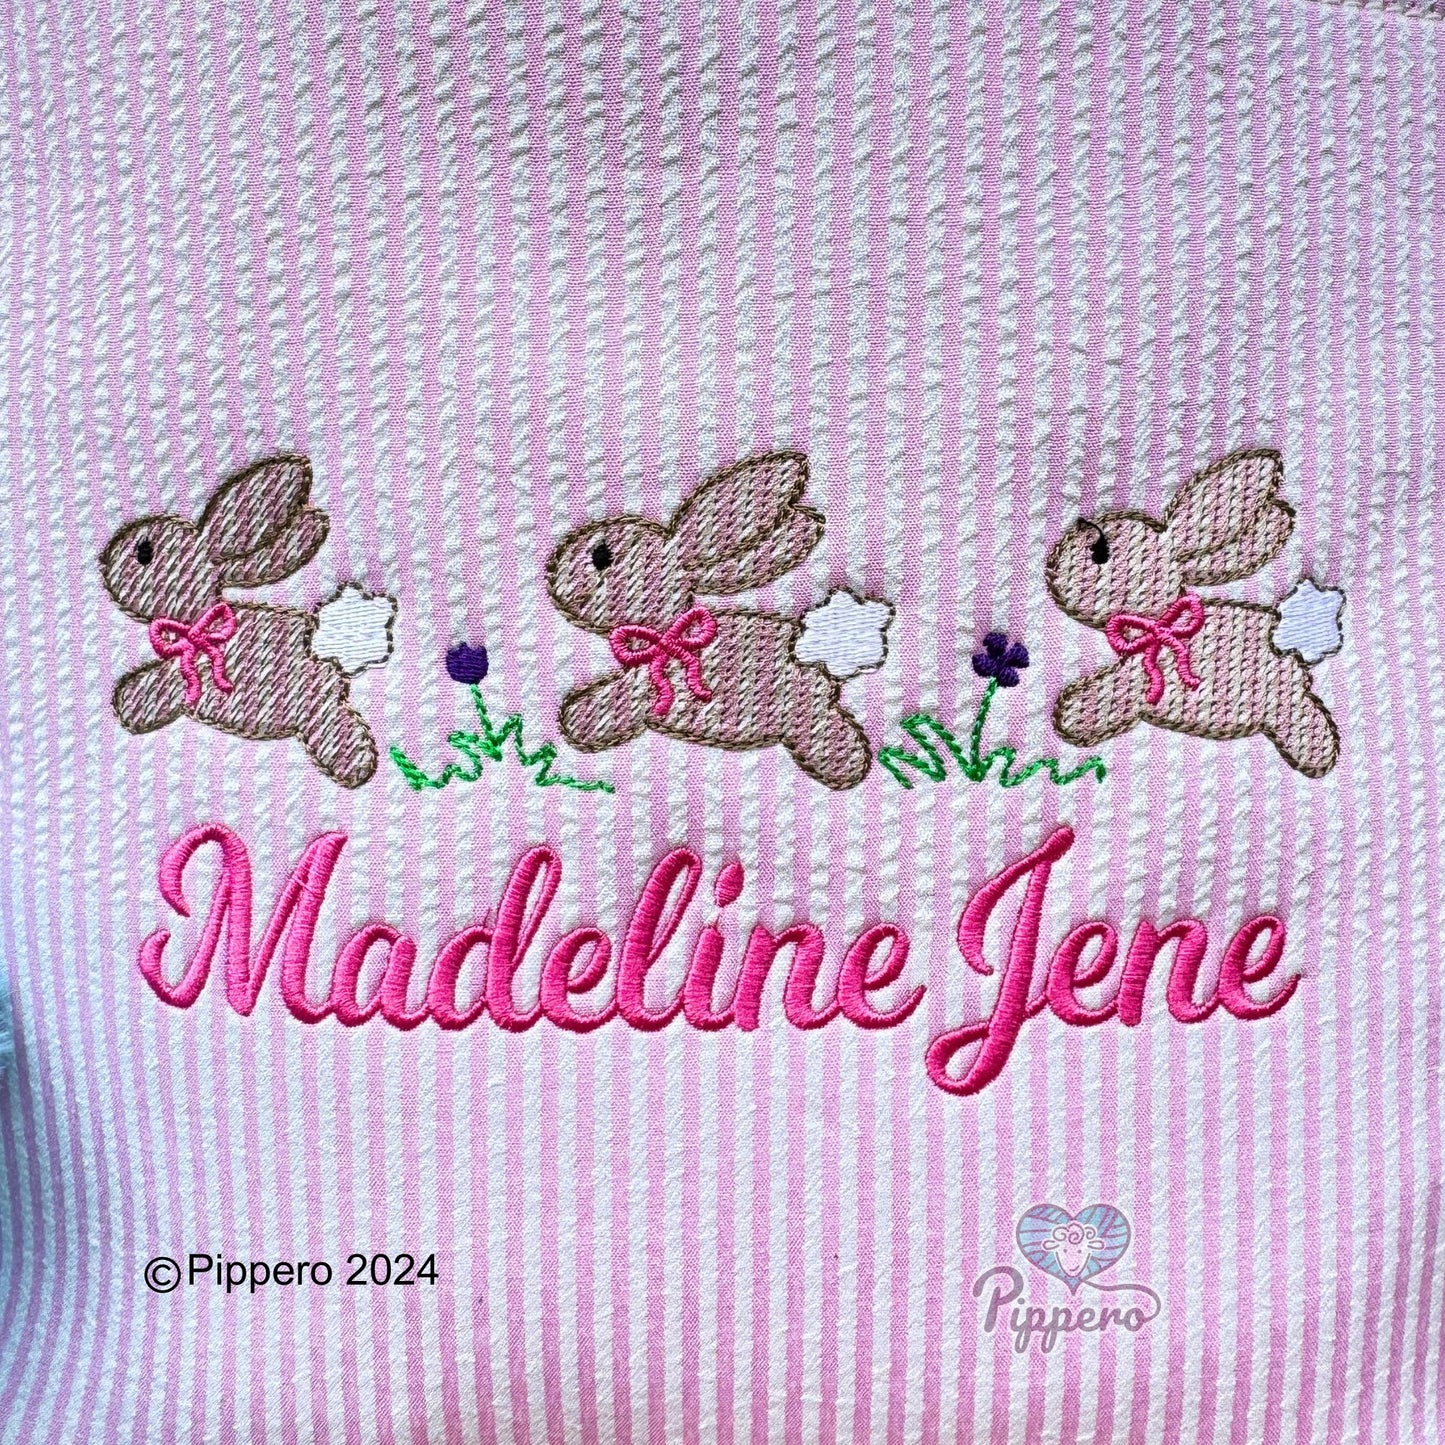 Personalized Custom Embroidered Striped Easter Bag Basket Bucket Tote Blue or Pink Three Bunny with Bow Design Kid’s Gift for Boy or Girl